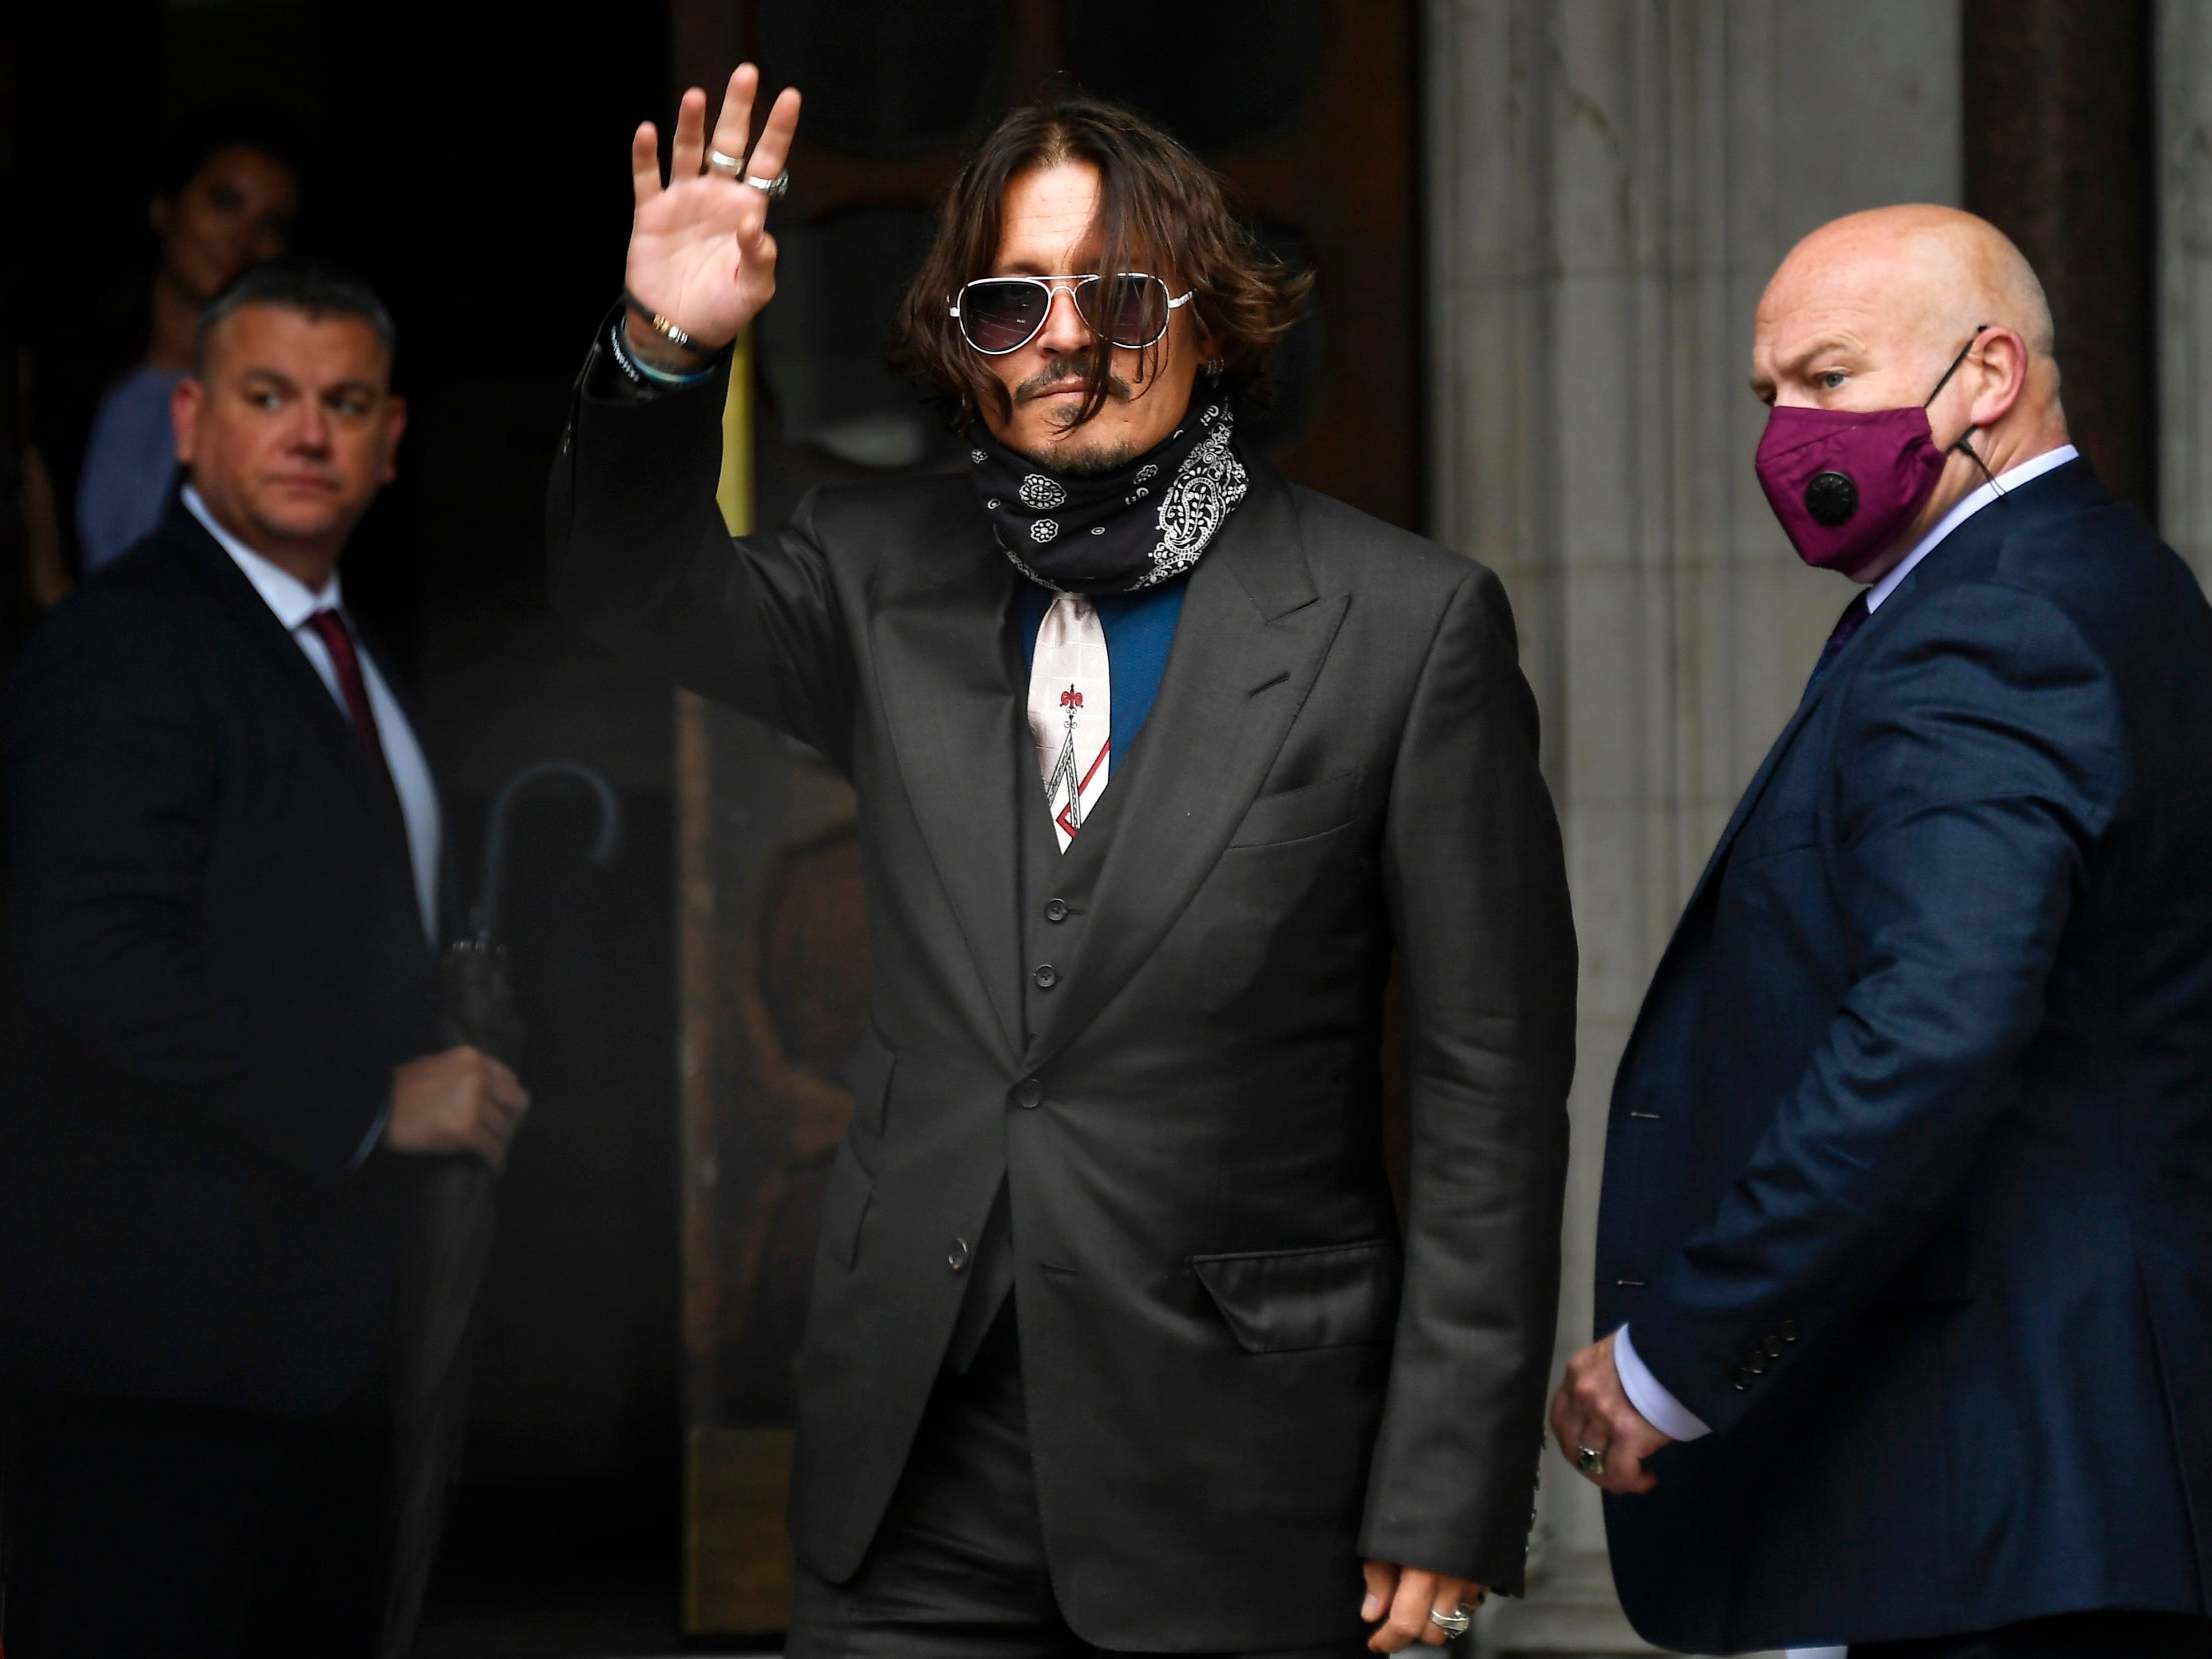 Johnny Depp arrives at the High Court in London for the second day of his libel action against The Sun